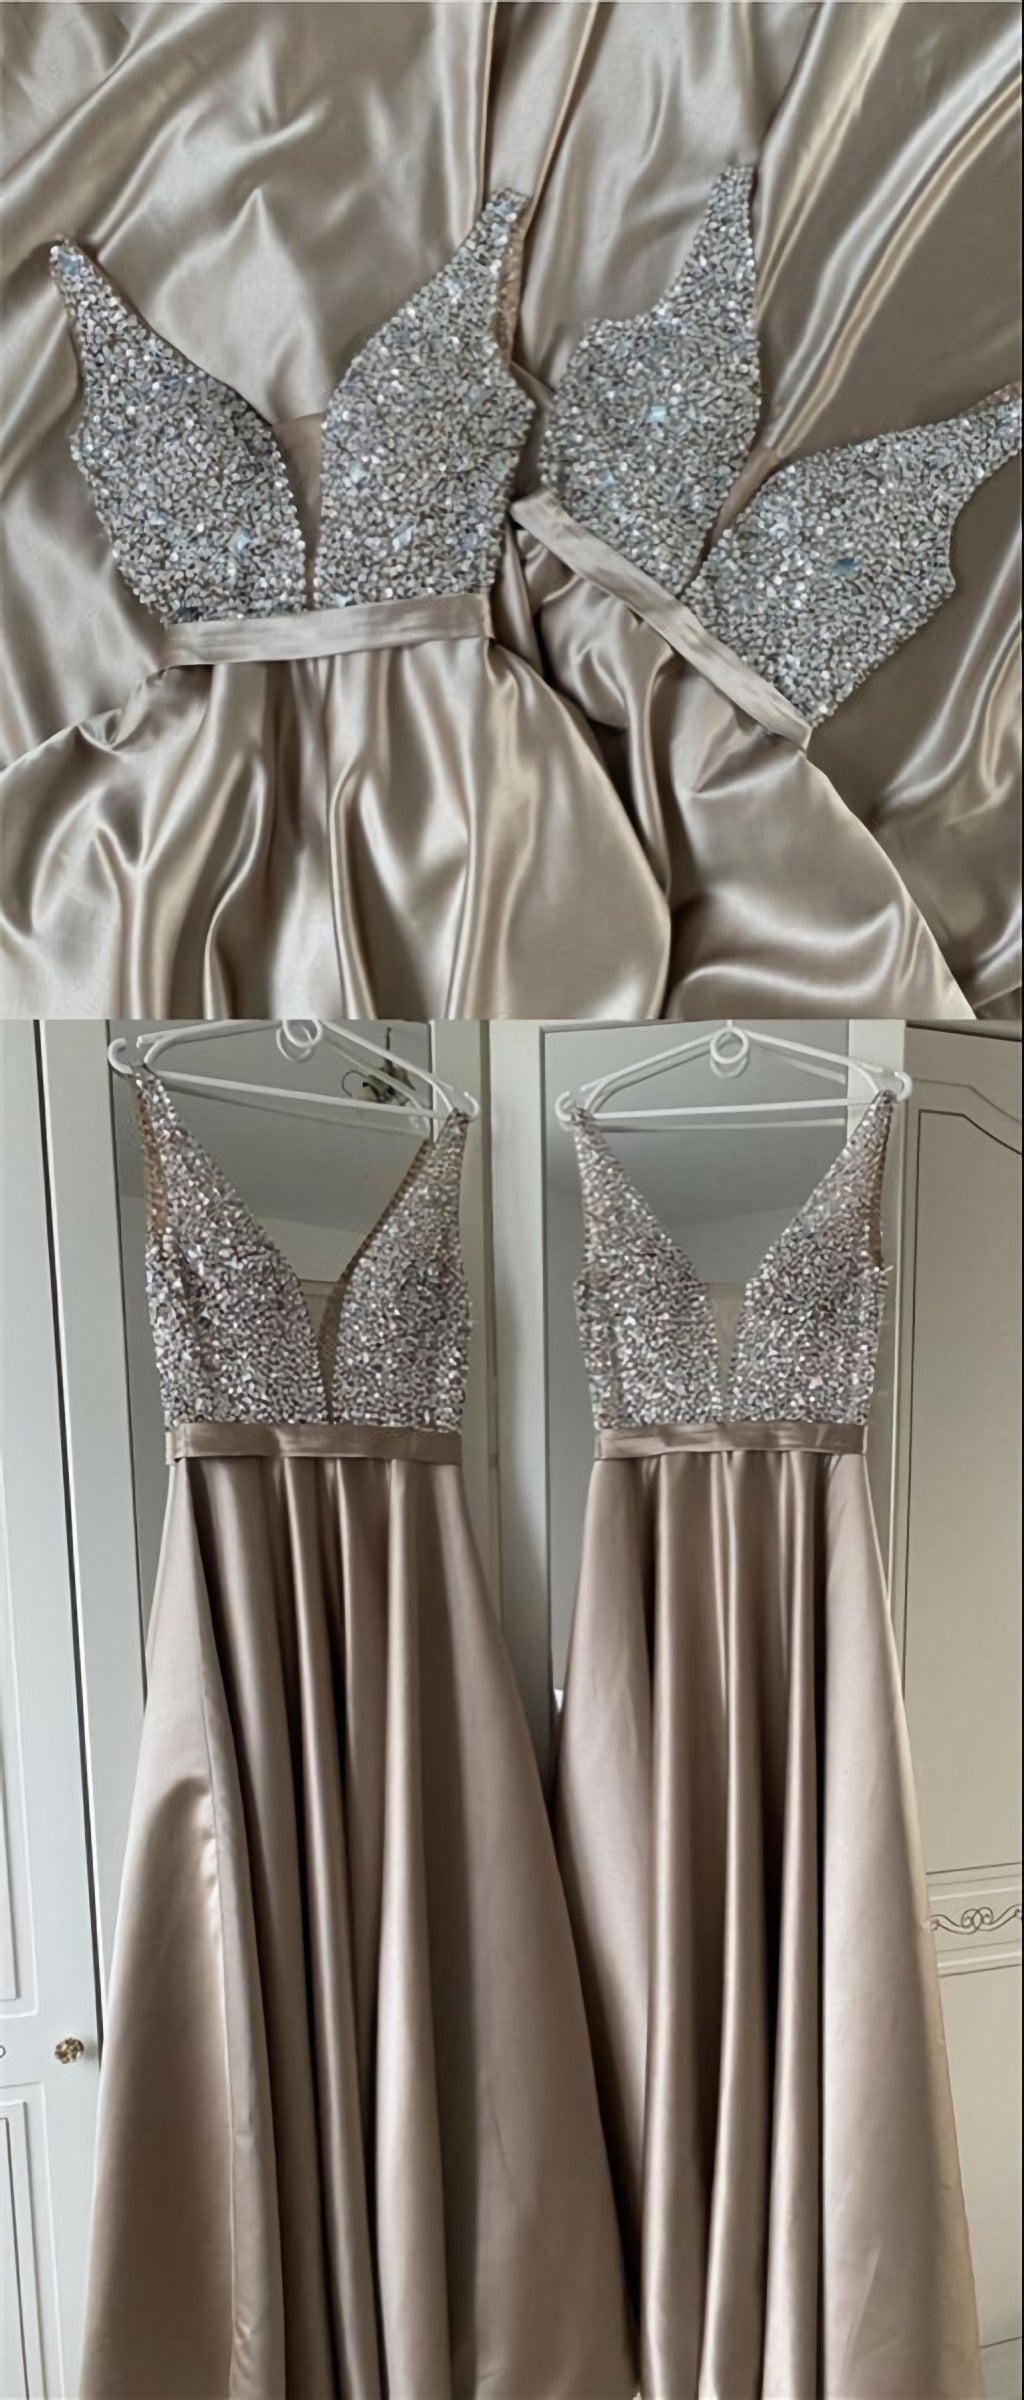 Prom Dresses For Blondes, Long Champagne Satin Bridesmaid Dresses, Plunge Neck Beaded Top Prom Evening Gown